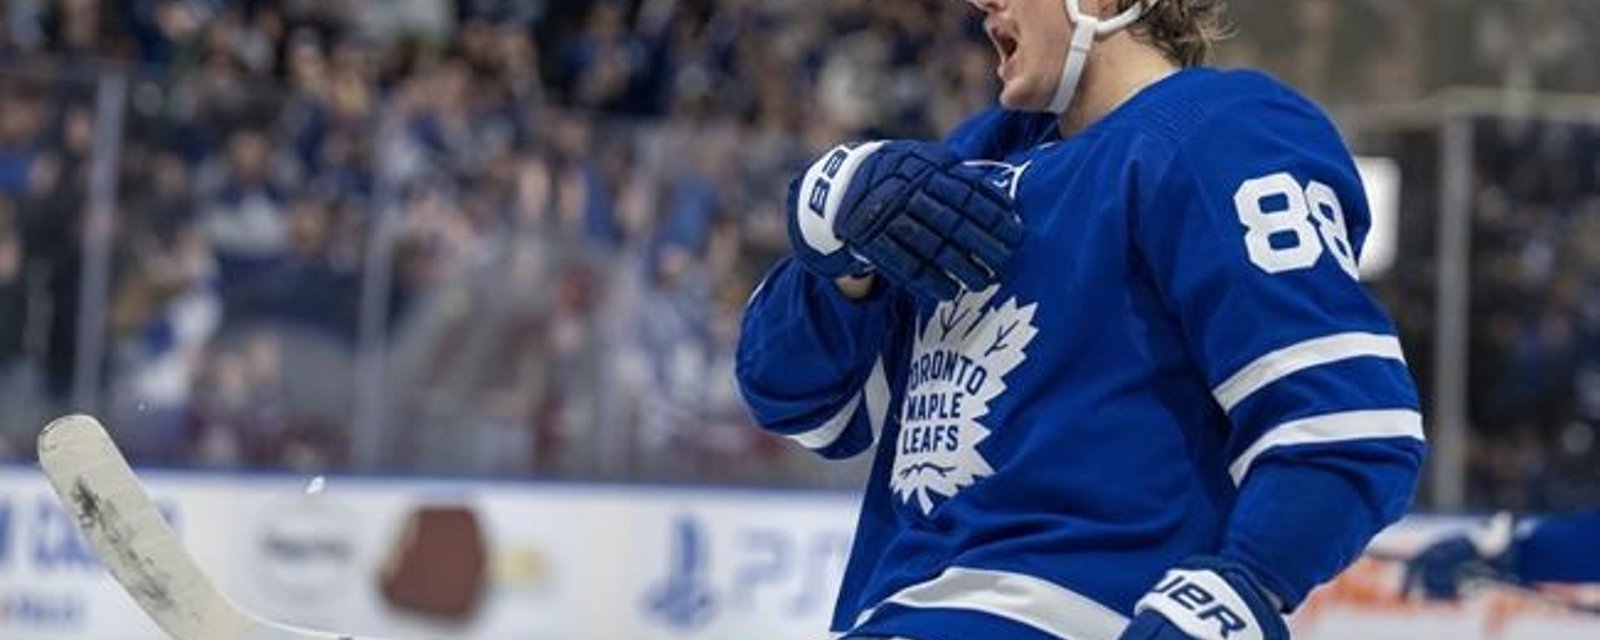 William Nylander trends on Twitter after locking down lucrative deal